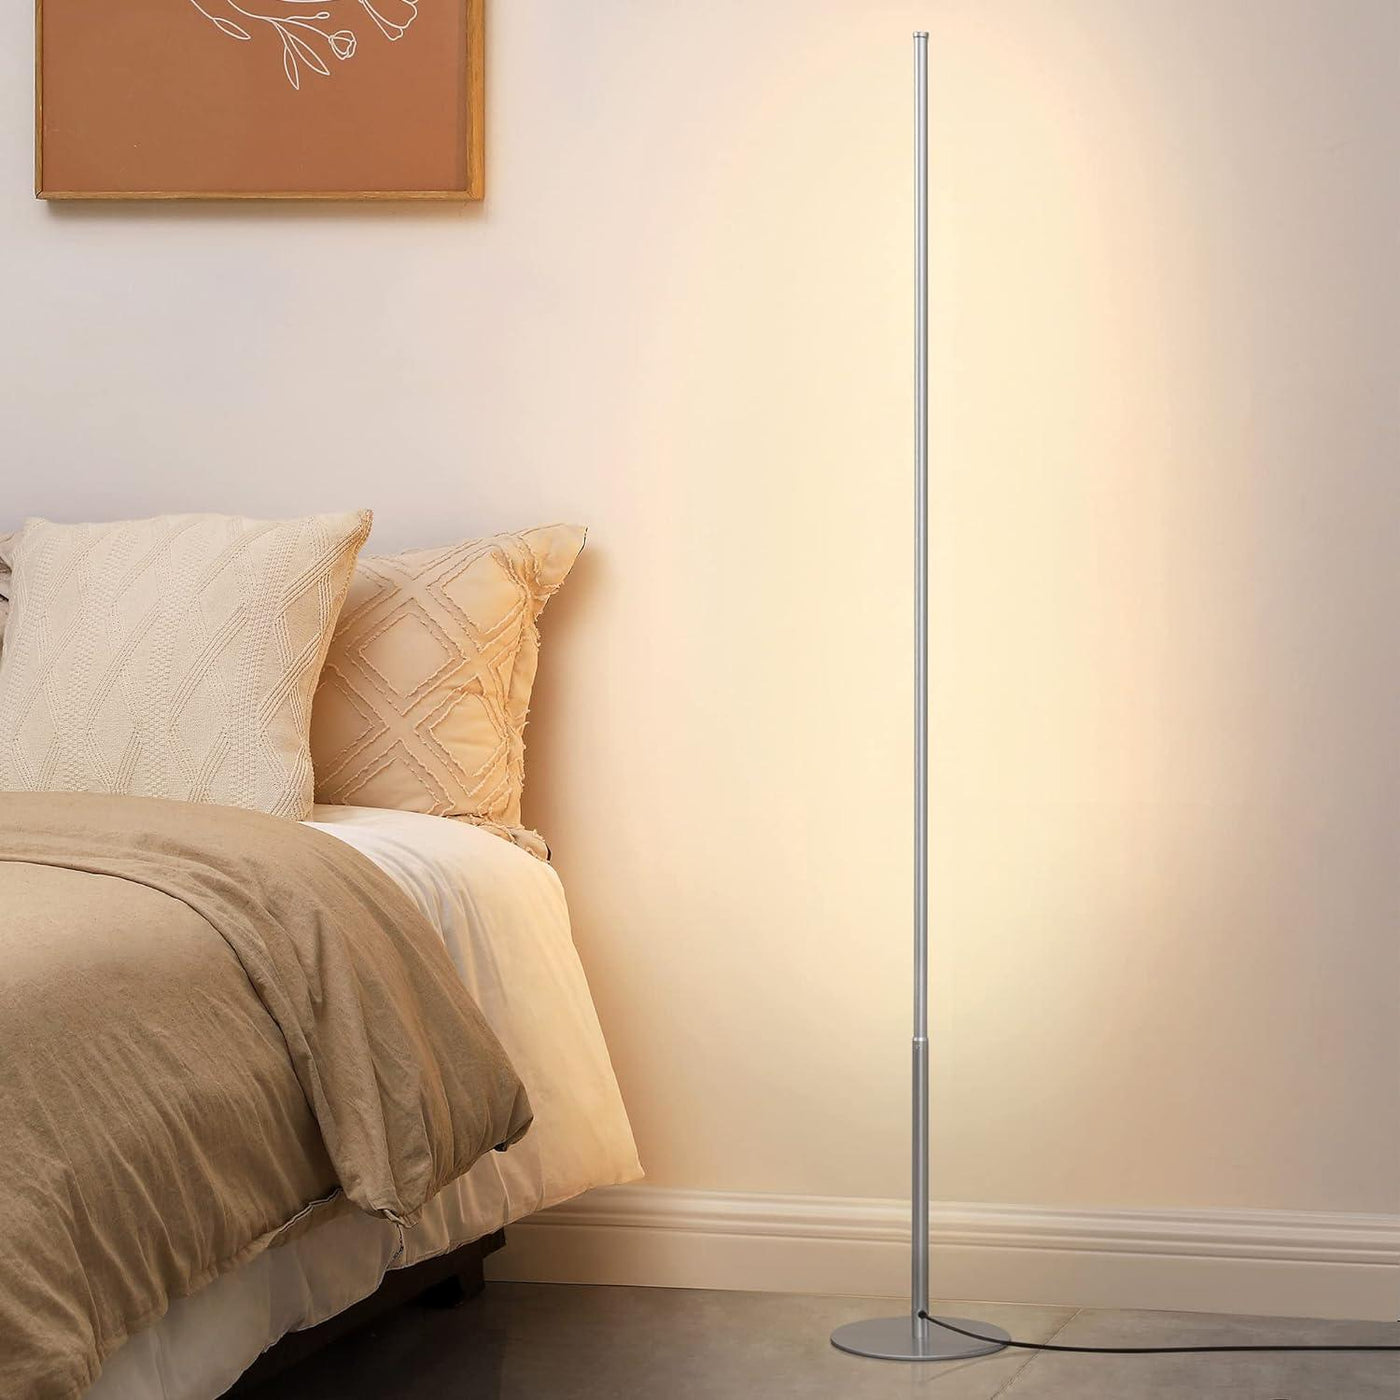 LED Floor Lamp, 57.5in Stepless Dimmable 1100Lm 3000K Warm White - Massive Discounts